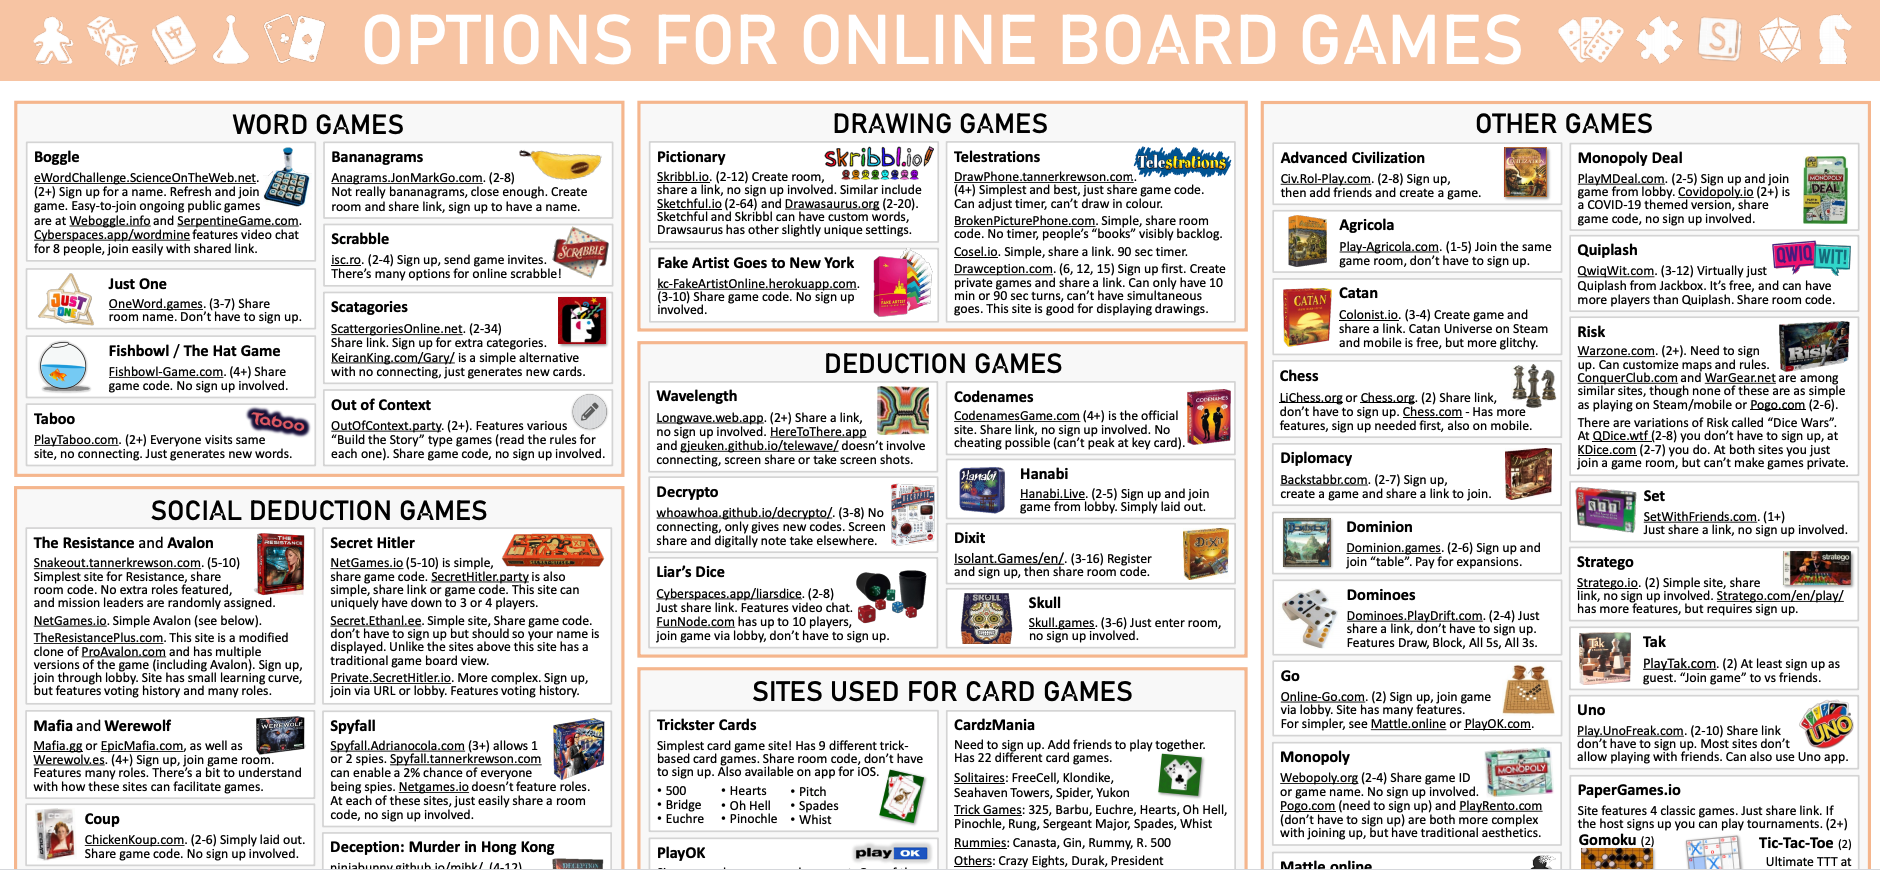 Big List of Options for Online Board Games. A PDF version with